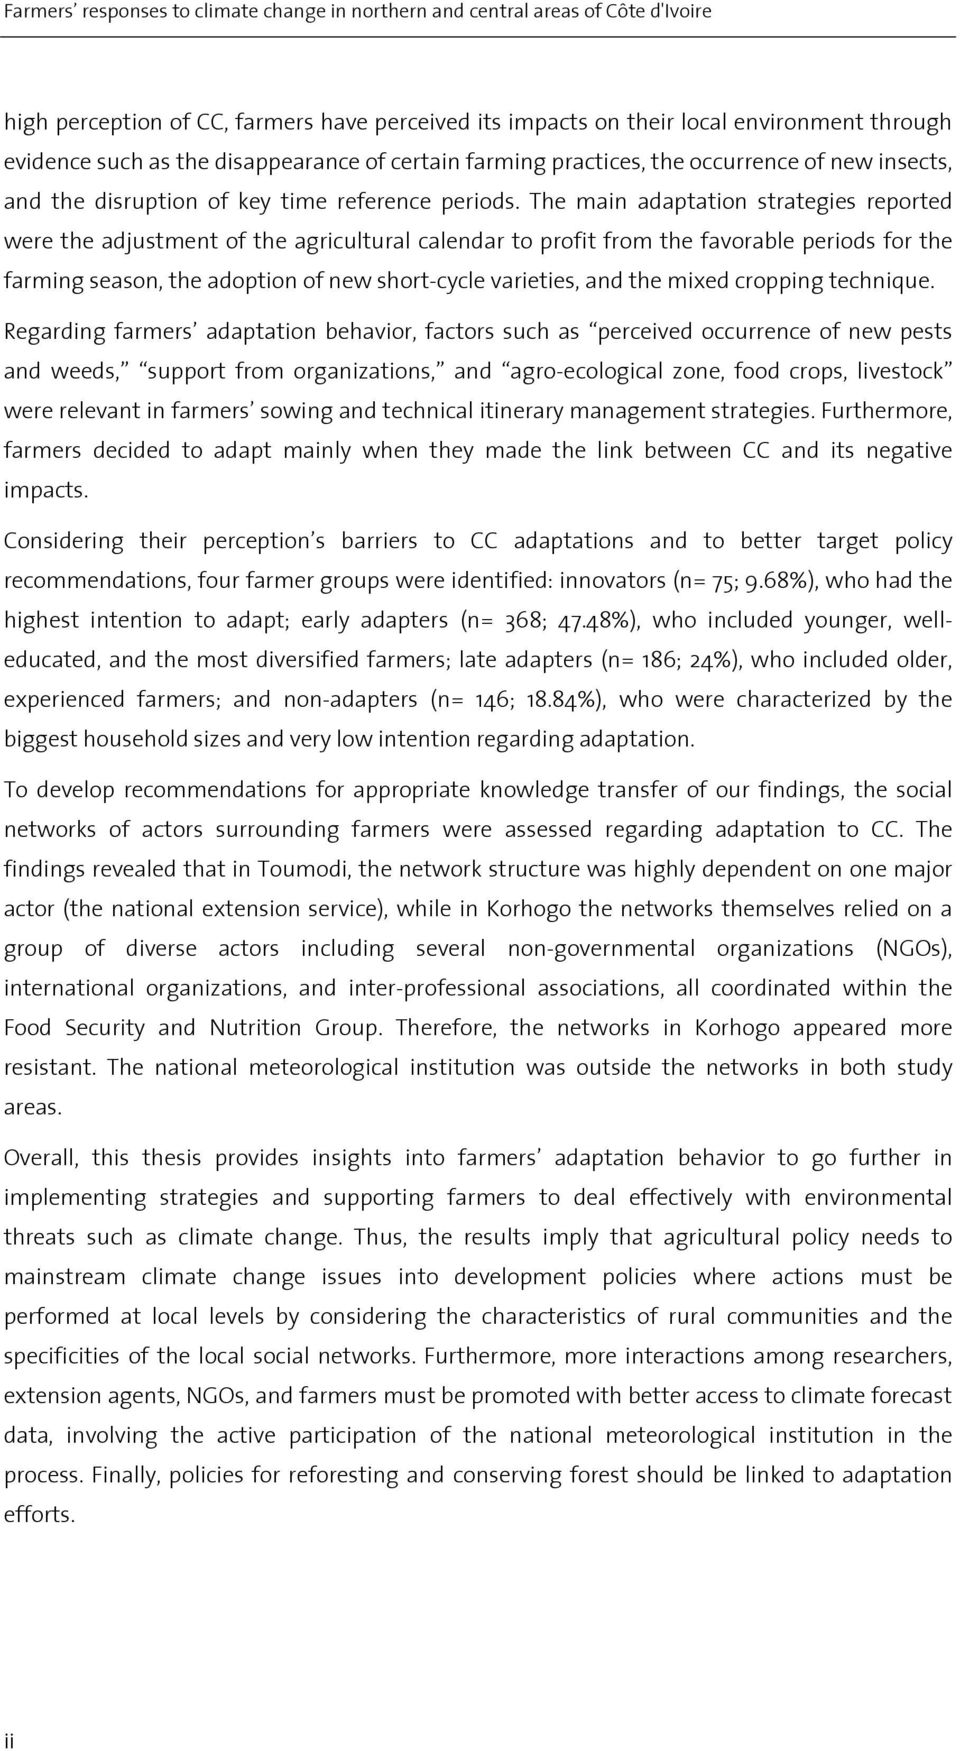 The main adaptation strategies reported were the adjustment of the agricultural calendar to profit from the favorable periods for the farming season, the adoption of new short-cycle varieties, and